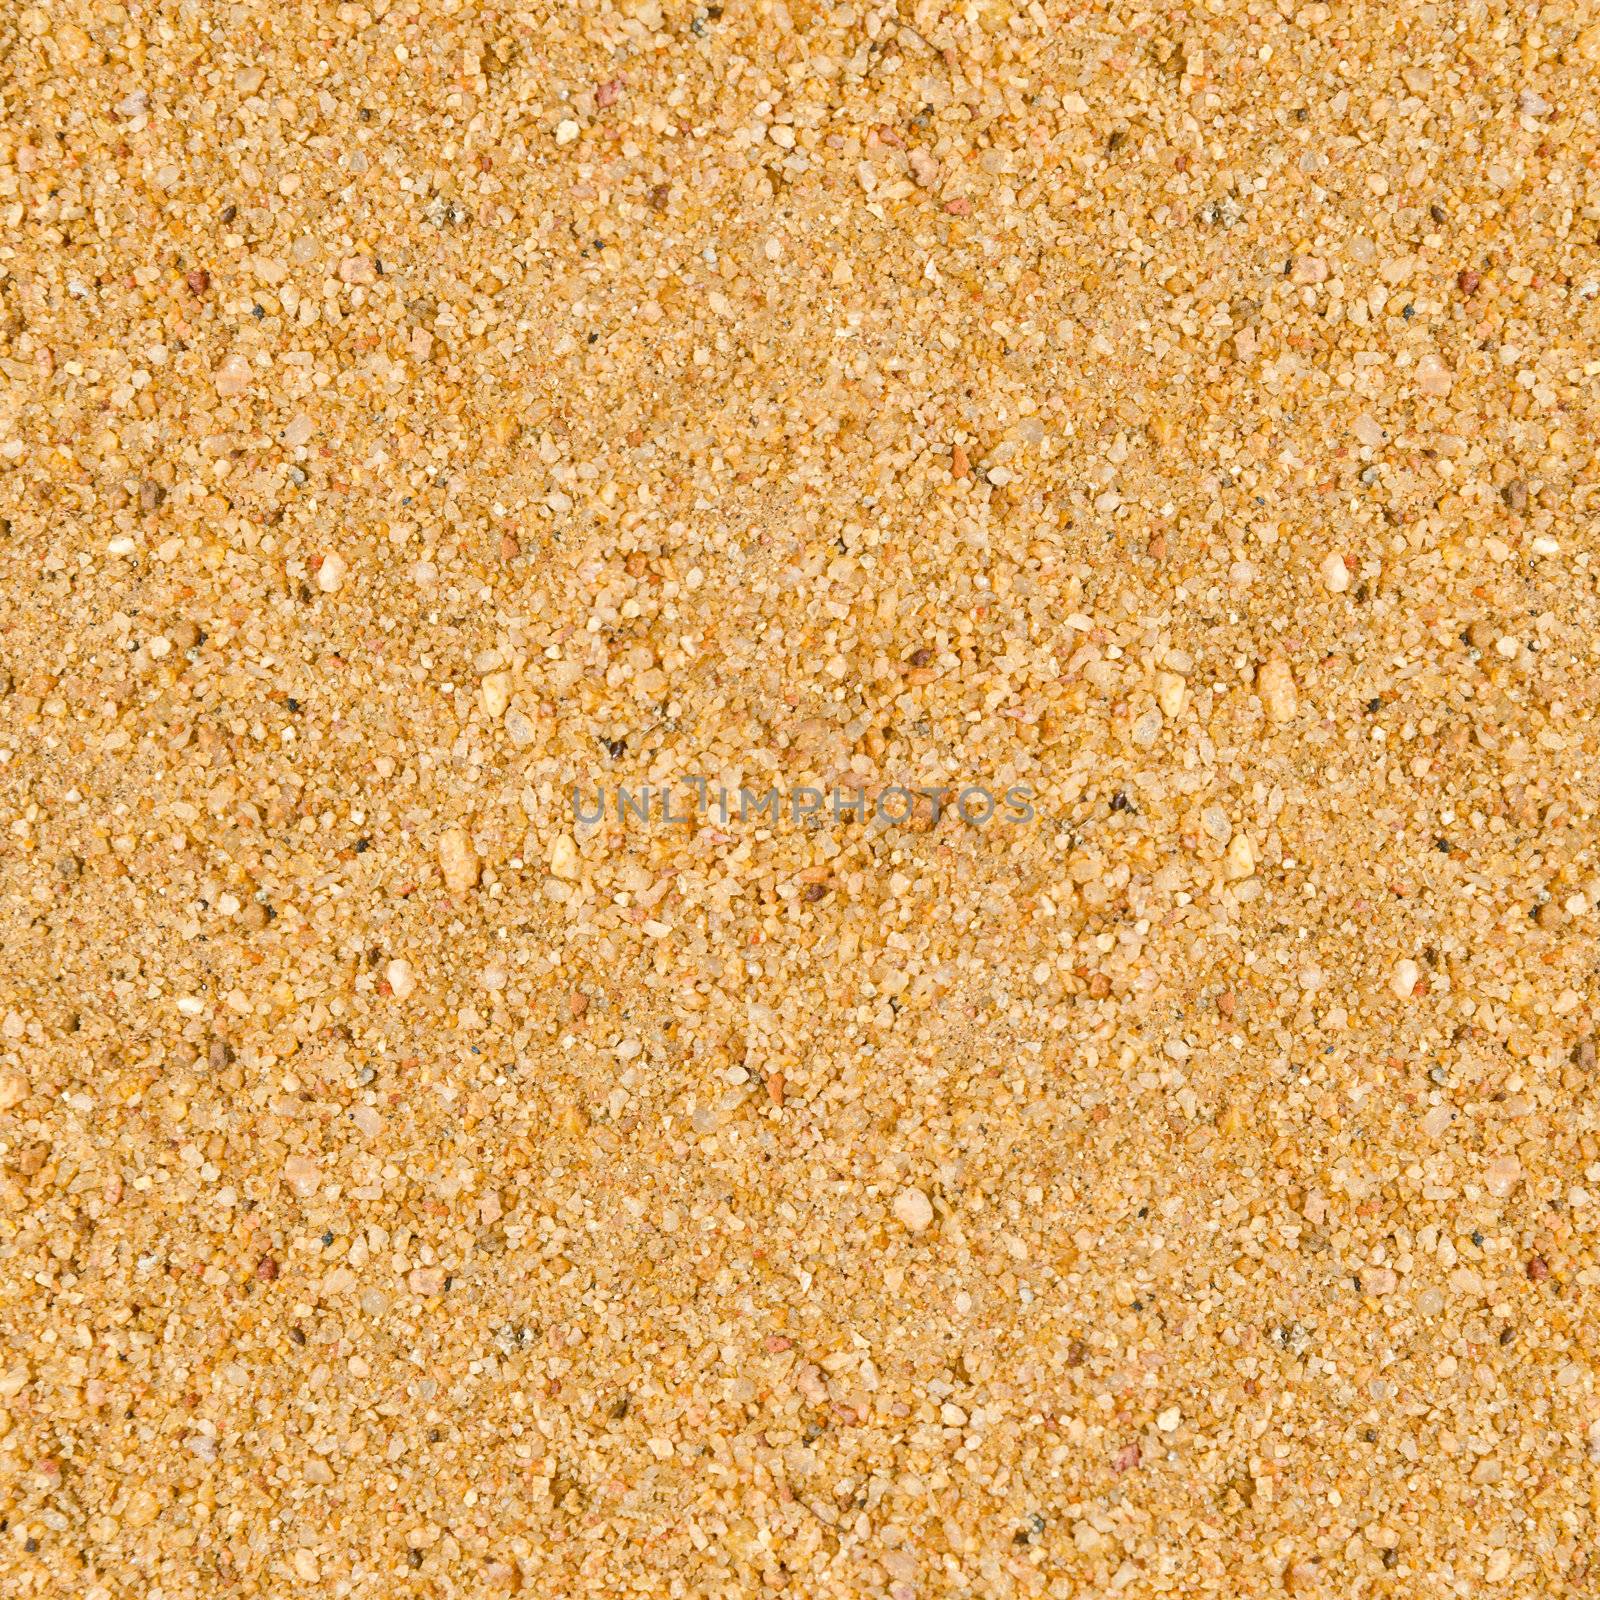 coarse-grained sand by Sergieiev